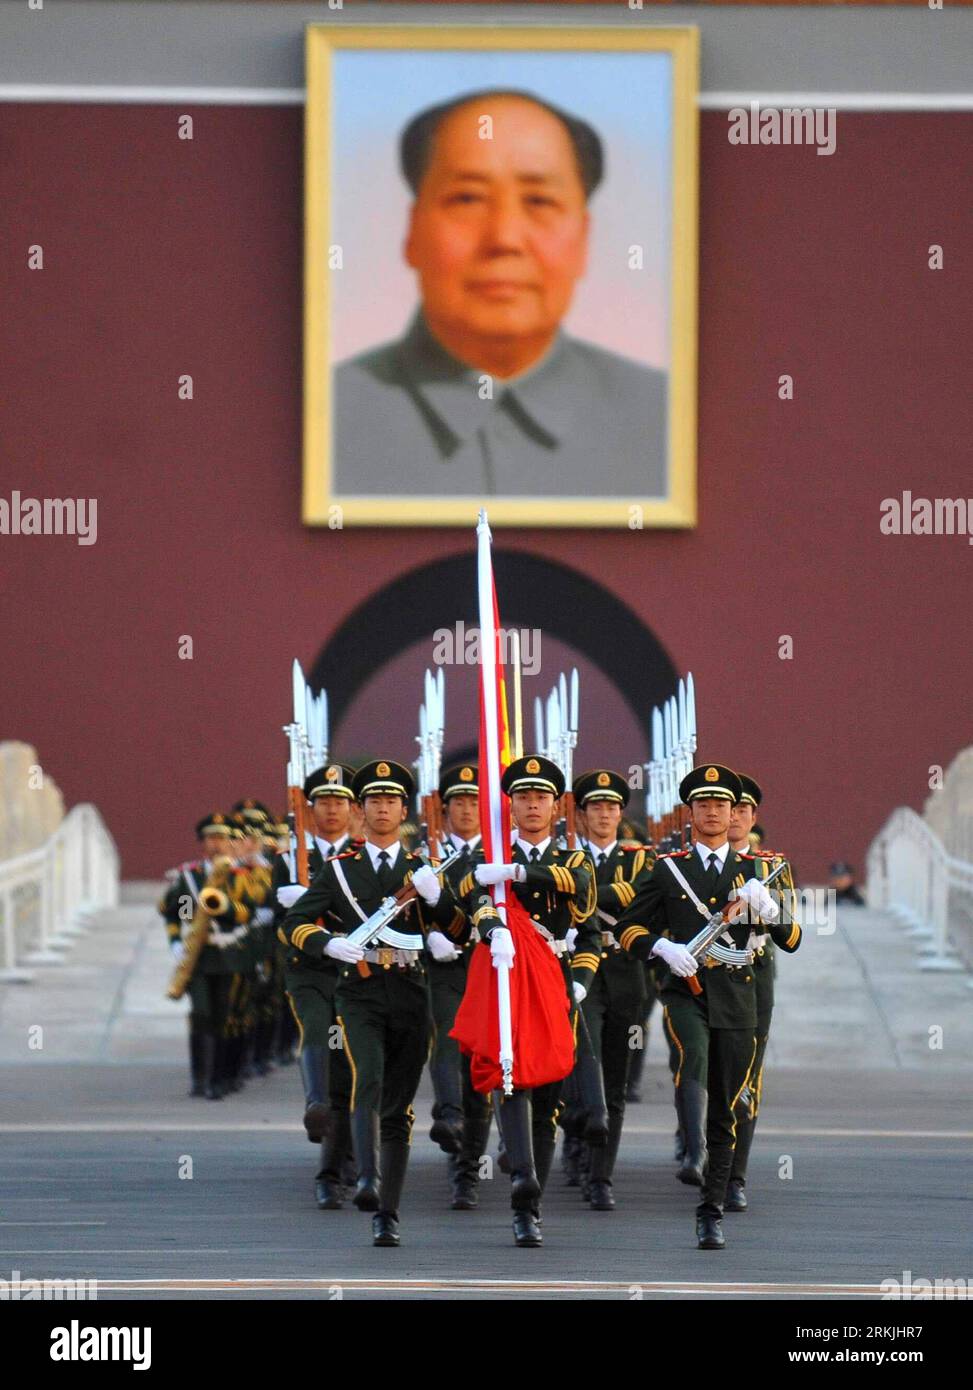 Bildnummer: 56138812  Datum: 01.10.2011  Copyright: imago/Xinhua (111001) -- BEIJING, Oct. 1, 2011 (Xinhua) -- Chinese national flag guards escort the flag across the Chang an Avenue in Beijing, capital of China, Oct. 1, 2011. More than 120,000 gathered at the Tian anmen Square to watch the national flag raising ceremony at dawn on Oct. 1, in celebration of the 62th anniversary of the founding of the People s Republic of China. (Xinhua/Luo Xiaoguang) (ly) CHINA-NATIONAL FLAG RAISING-NATIONAL DAY (CN) PUBLICATIONxNOTxINxCHN Gesellschaft Militär Fahnenappell Fahne Nationalfahne Appell Feiertag N Stock Photo